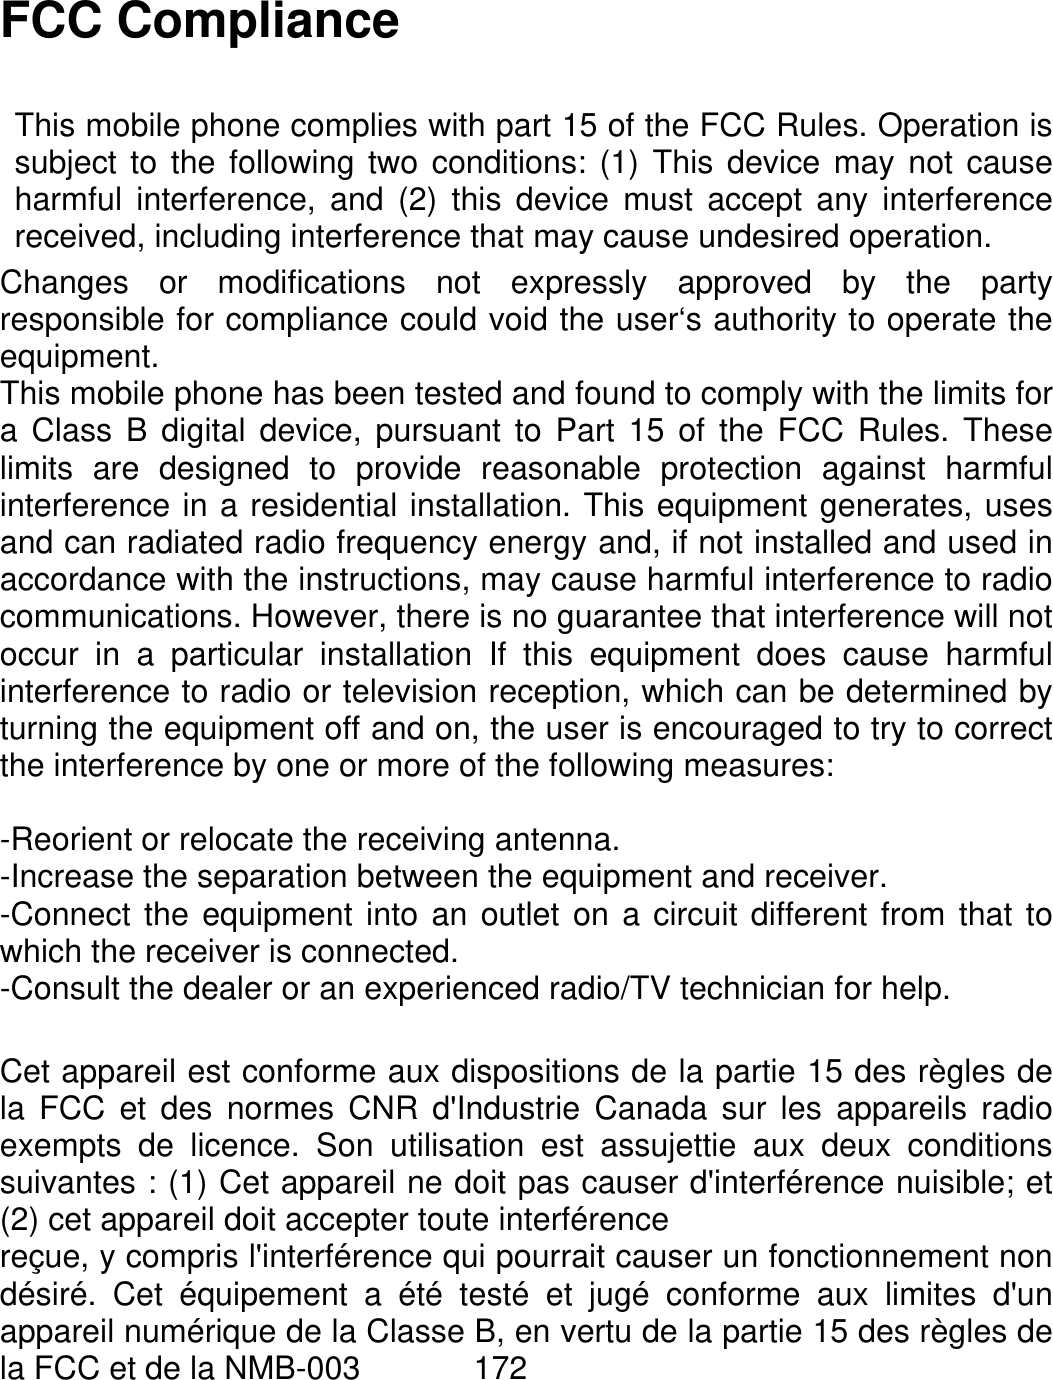   FCC Compliance  This mobile phone complies with part 15 of the FCC Rules. Operation issubject to the following two conditions: (1) This device may not causeharmful interference, and (2) this device must accept any interferencereceived, including interference that may cause undesired operation. Changes or modifications not expressly approved by the partyresponsible for compliance could void the user‘s authority to operate theequipment. This mobile phone has been tested and found to comply with the limits fora Class B digital device, pursuant to Part 15 of the FCC Rules. Theselimits are designed to provide reasonable protection against harmfulinterference in a residential installation. This equipment generates, usesand can radiated radio frequency energy and, if not installed and used inaccordance with the instructions, may cause harmful interference to radiocommunications. However, there is no guarantee that interference will notoccur in a particular installation If this equipment does cause harmfulinterference to radio or television reception, which can be determined byturning the equipment off and on, the user is encouraged to try to correctthe interference by one or more of the following measures:  -Reorient or relocate the receiving antenna. -Increase the separation between the equipment and receiver. -Connect the equipment into an outlet on a circuit different from that towhich the receiver is connected. -Consult the dealer or an experienced radio/TV technician for help.  Cet appareil est conforme aux dispositions de la partie 15 des règles dela FCC et des normes CNR d&apos;Industrie Canada sur les appareils radioexempts de licence. Son utilisation est assujettie aux deux conditionssuivantes : (1) Cet appareil ne doit pas causer d&apos;interférence nuisible; et(2) cet appareil doit accepter toute interférence reçue, y compris l&apos;interférence qui pourrait causer un fonctionnement nondésiré. Cet équipement a été testé et jugé conforme aux limites d&apos;unappareil numérique de la Classe B, en vertu de la partie 15 des règles dela FCC et de la NMB-003       172 